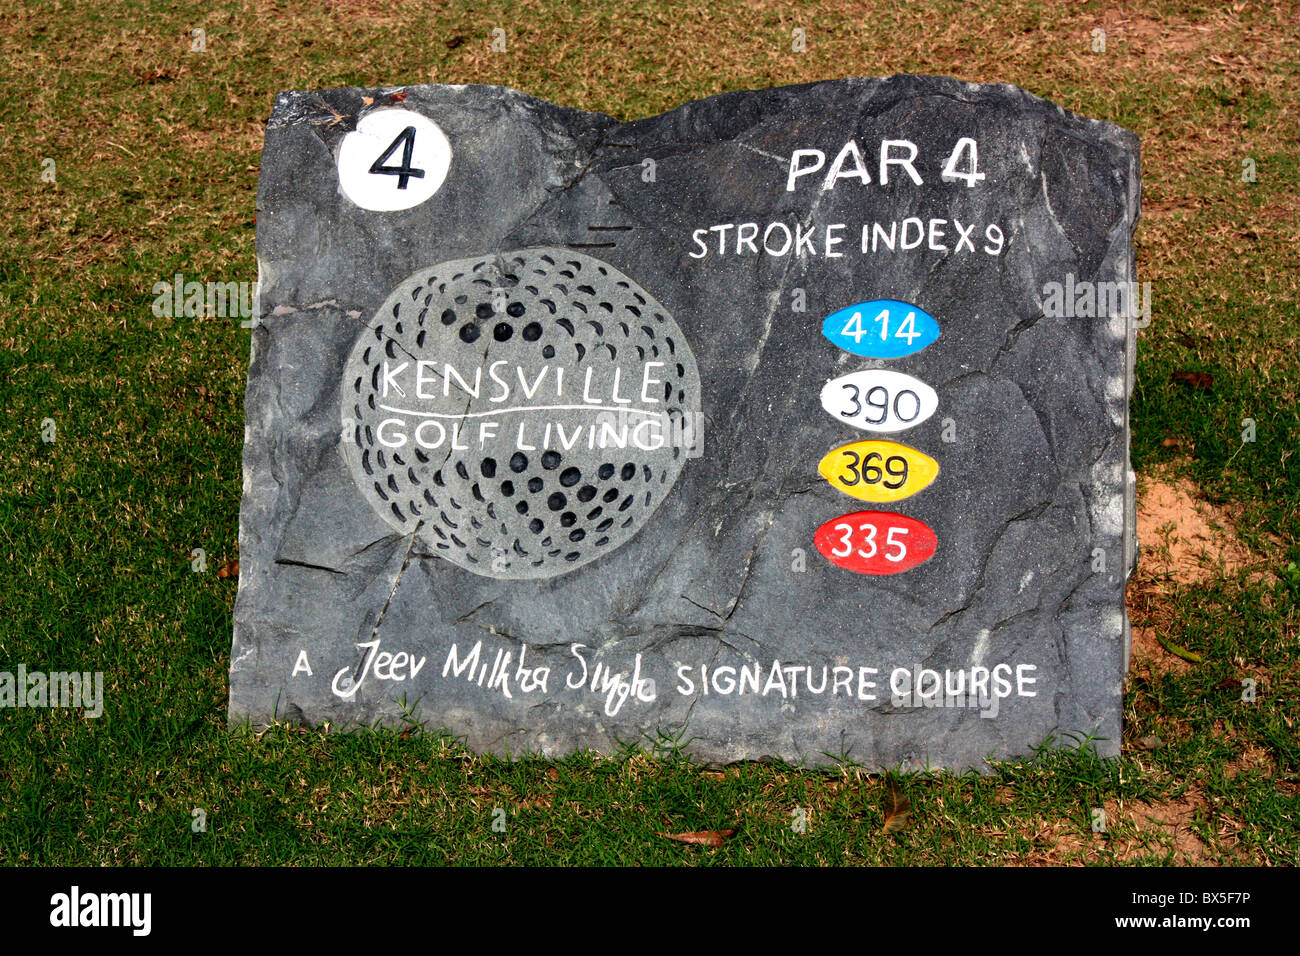 Par 4 yardage information board in a golf course Stock Photo